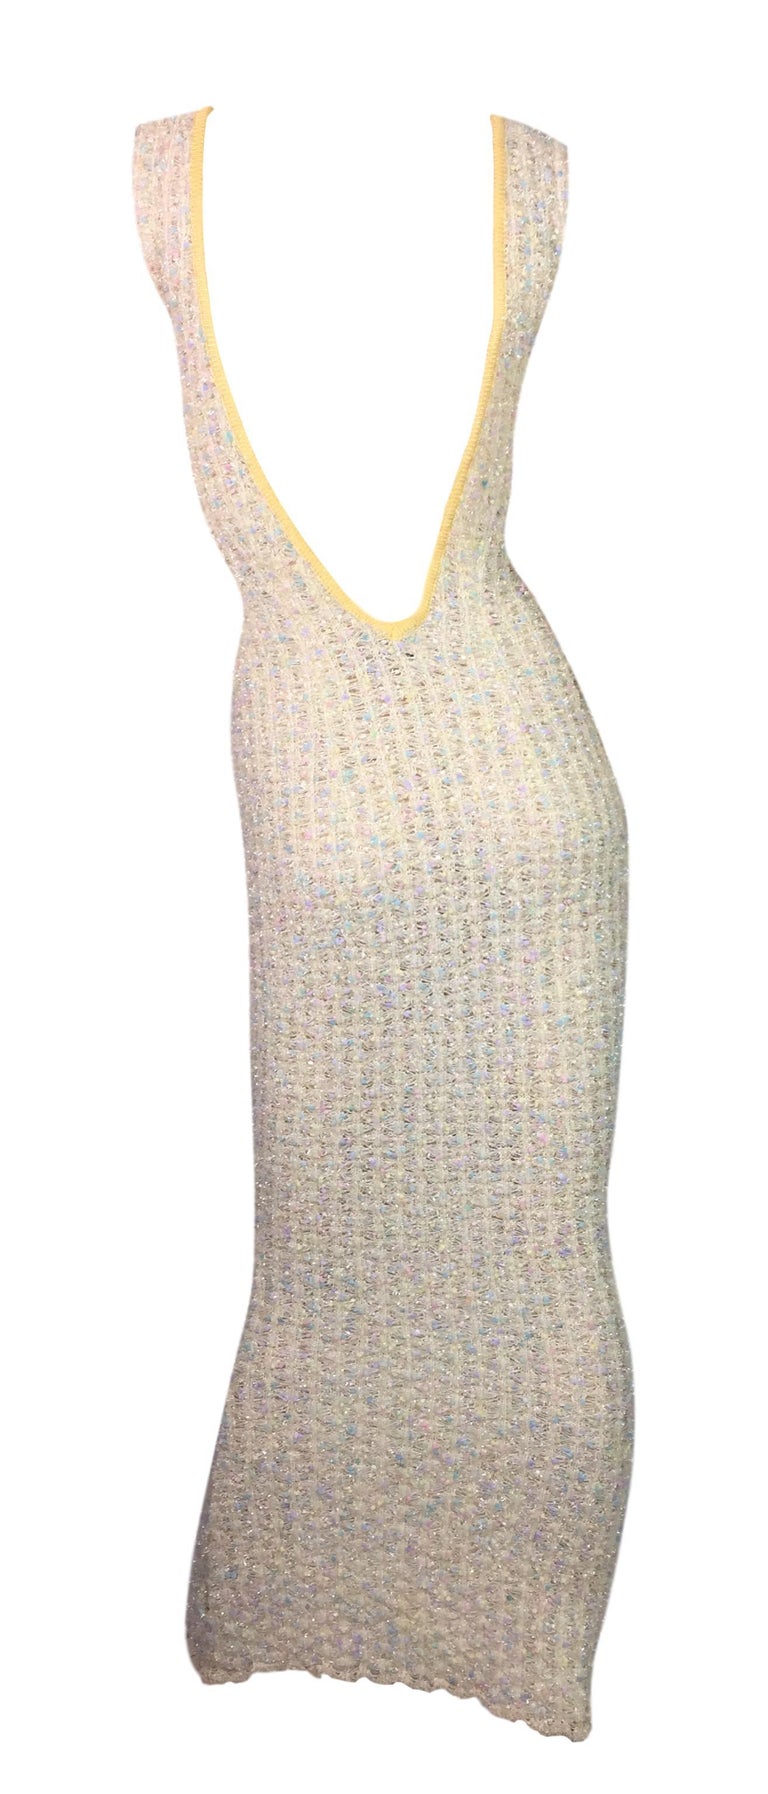 S/S 1997 Chanel Sheer Knit Plunging Back Confetti Tweed Wiggle Long ...